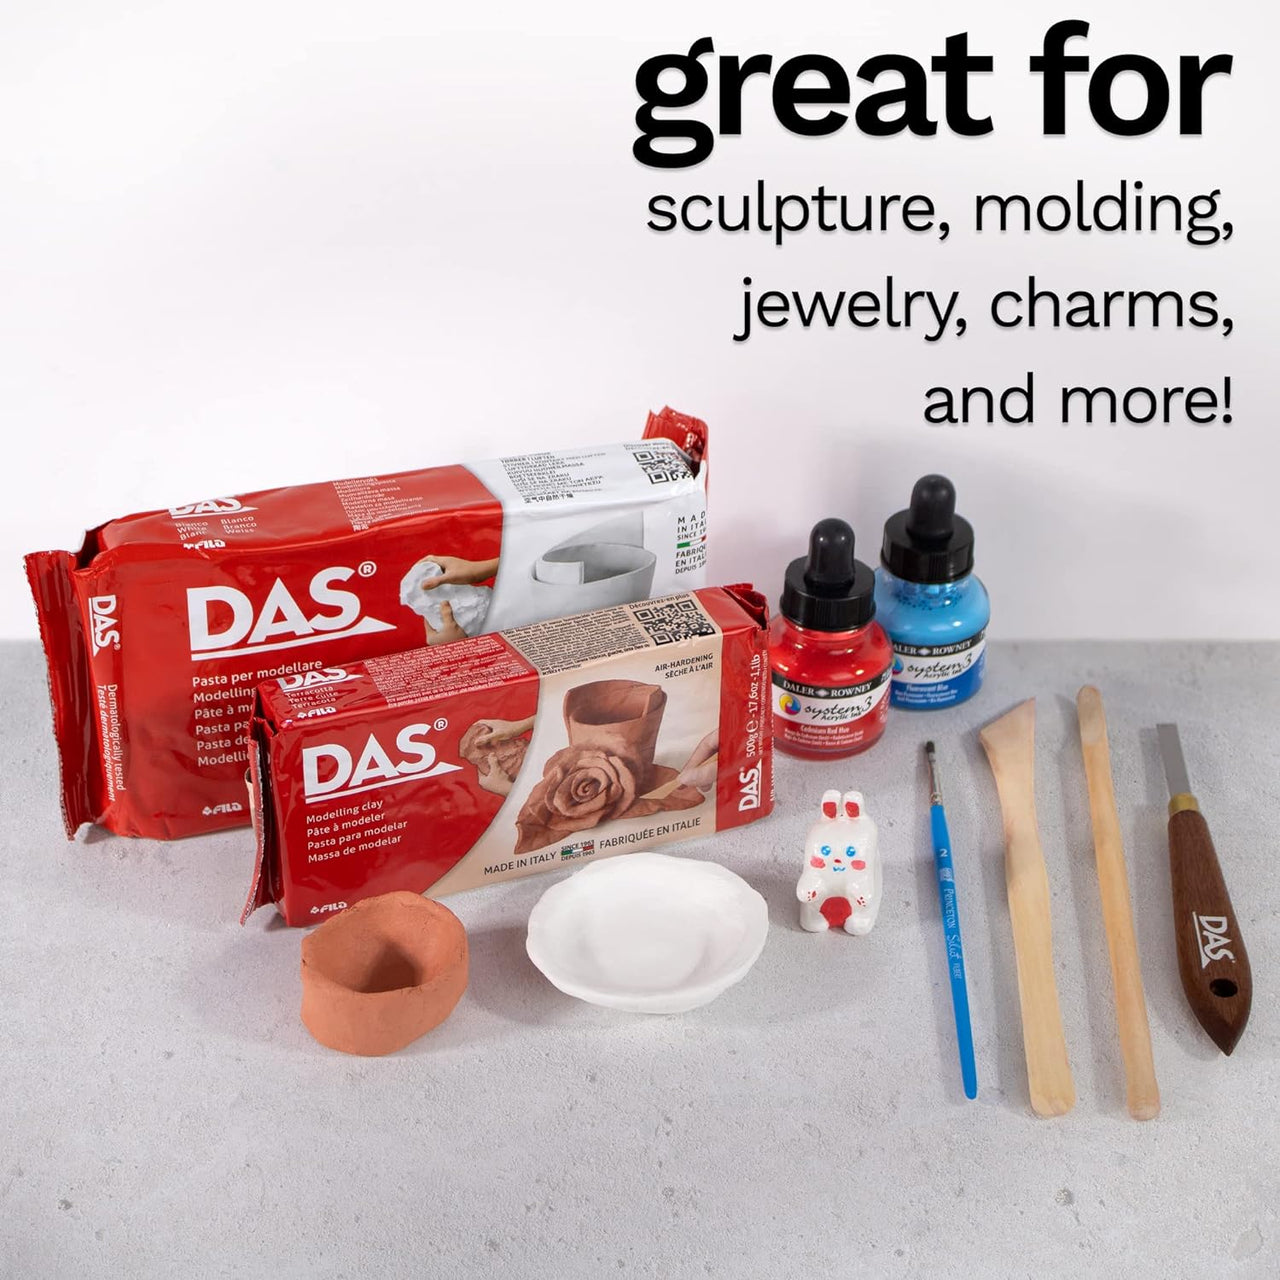 Air Dry Modelling Clay Deal - 17 Pieces